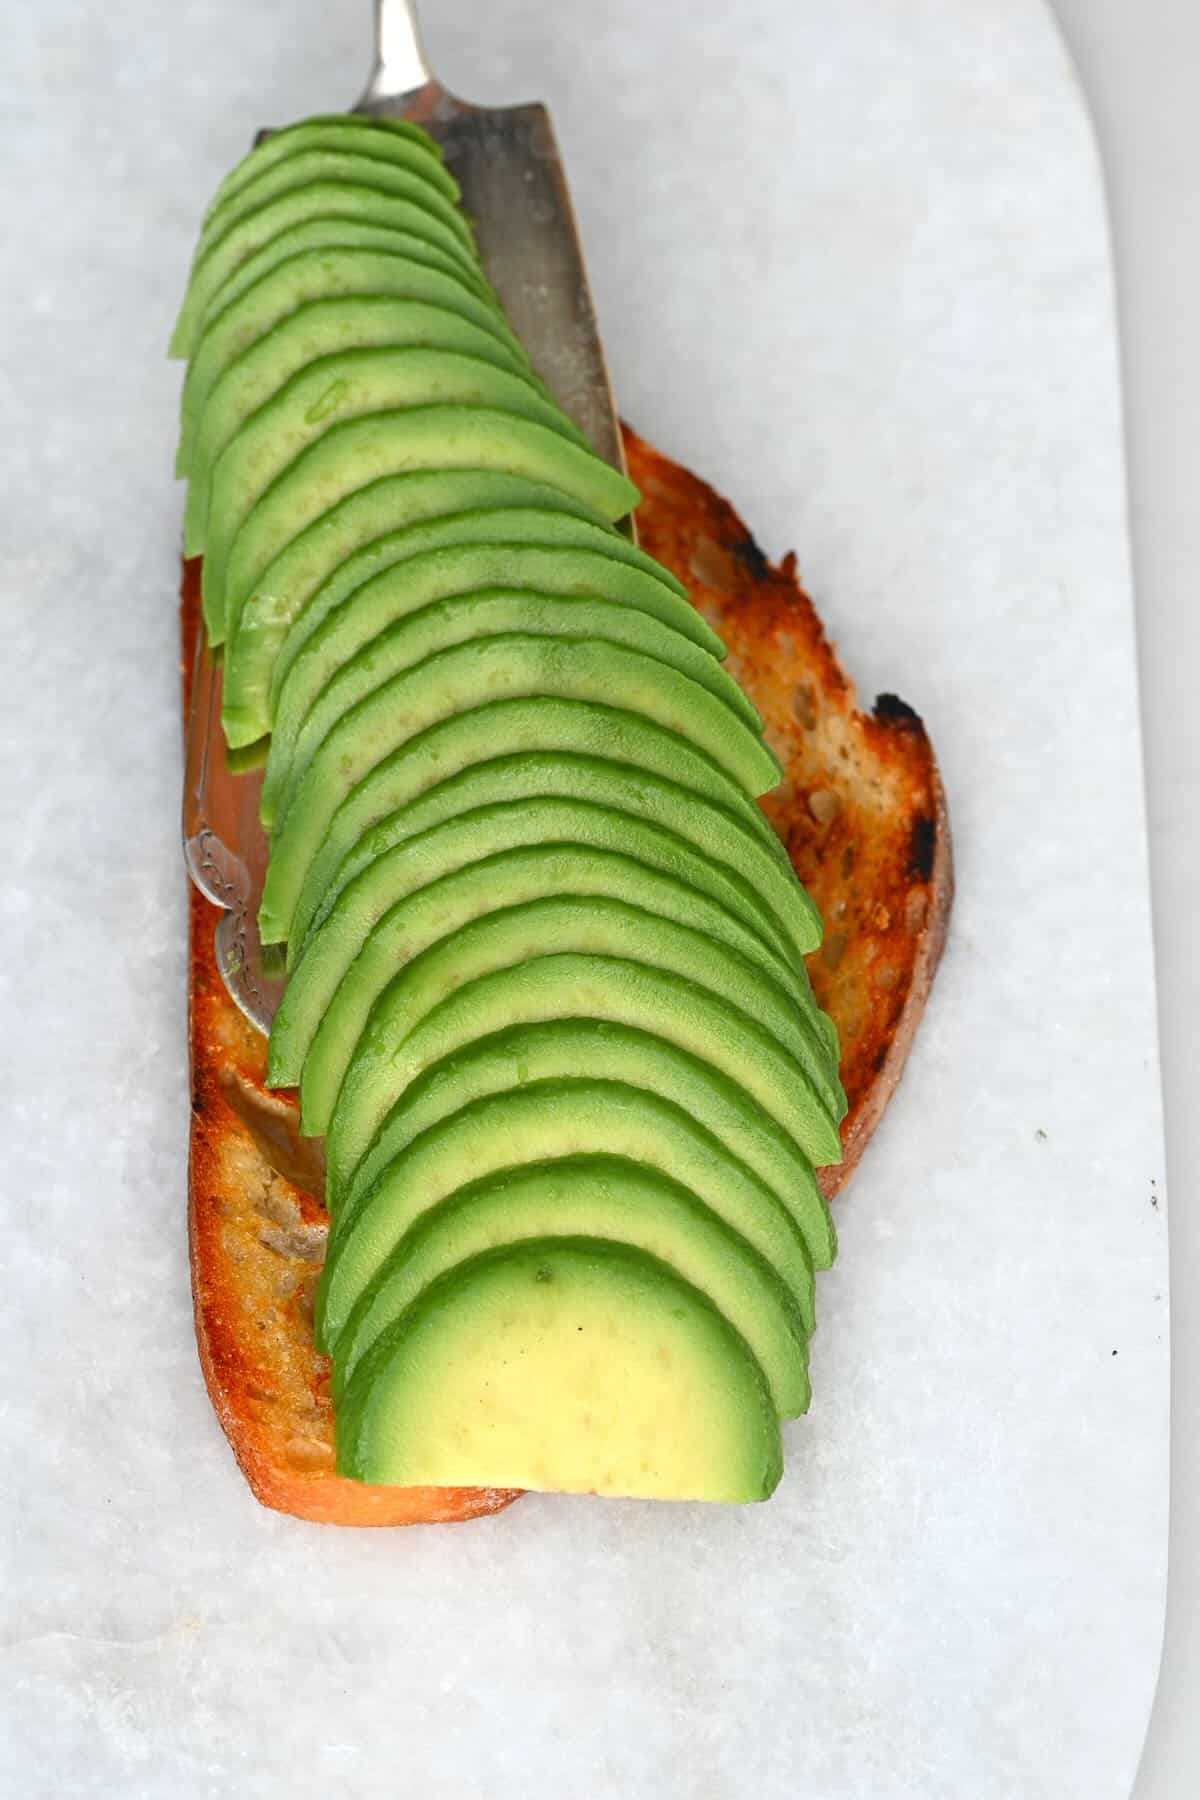 Placing avocado slices on slice of toasted bread